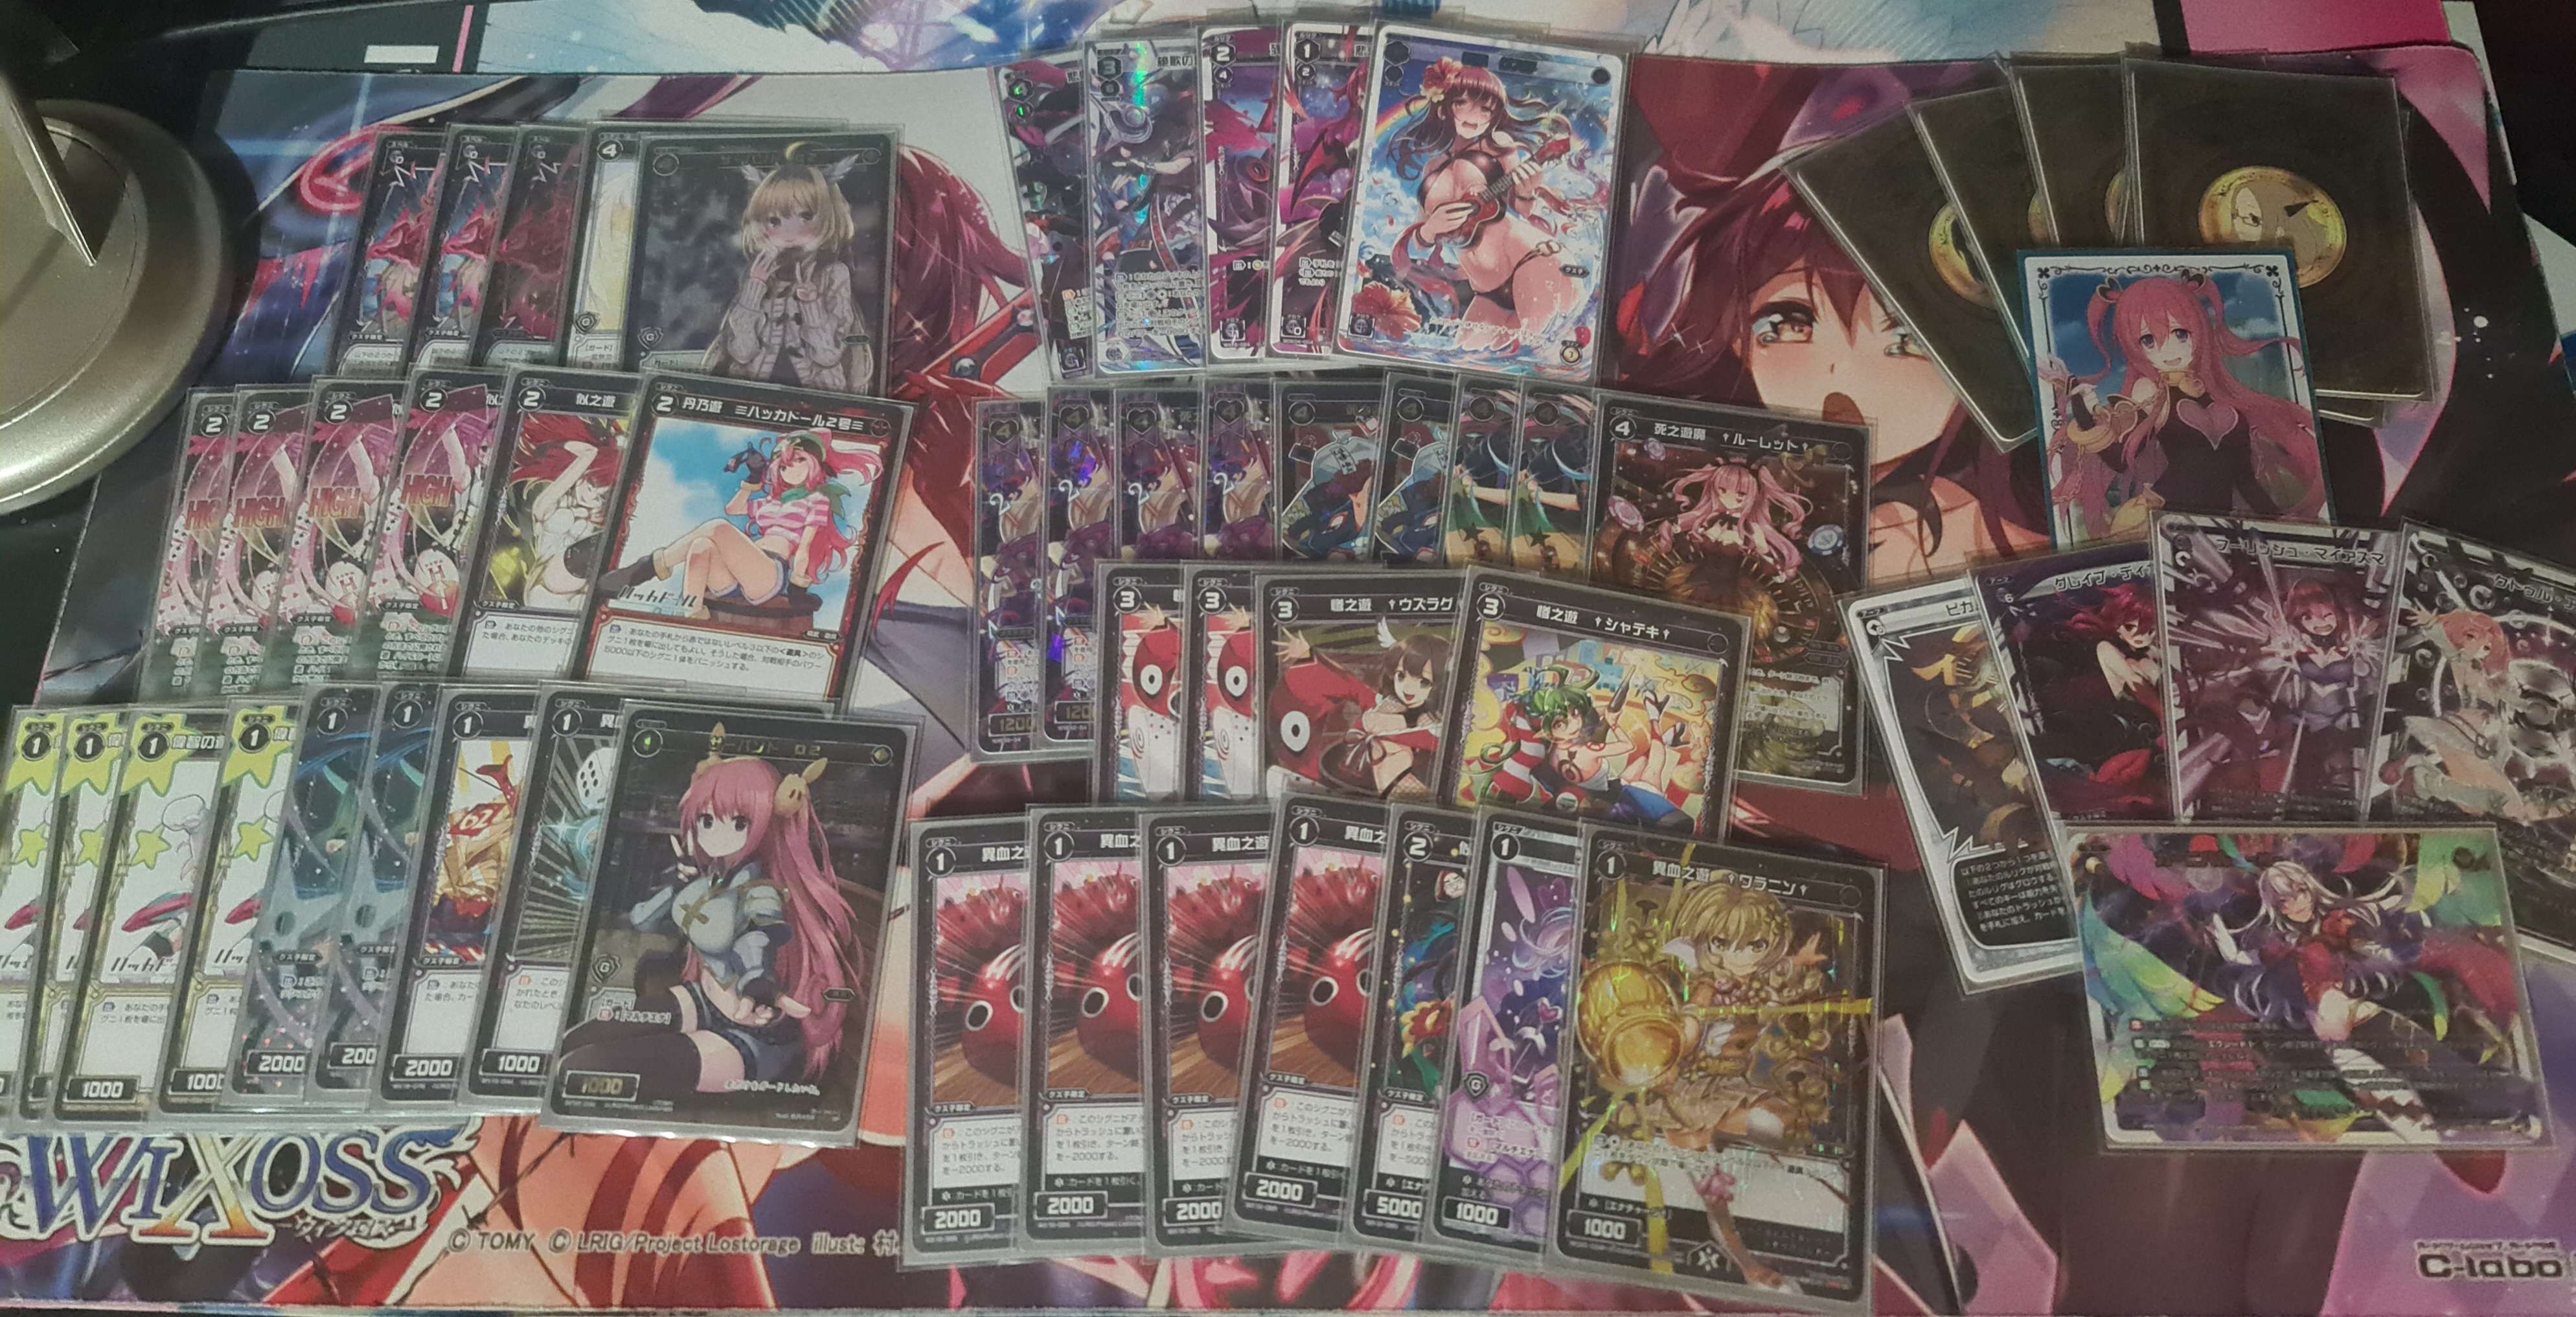 Tournaments/Events｜WIXOSS-ウィクロス